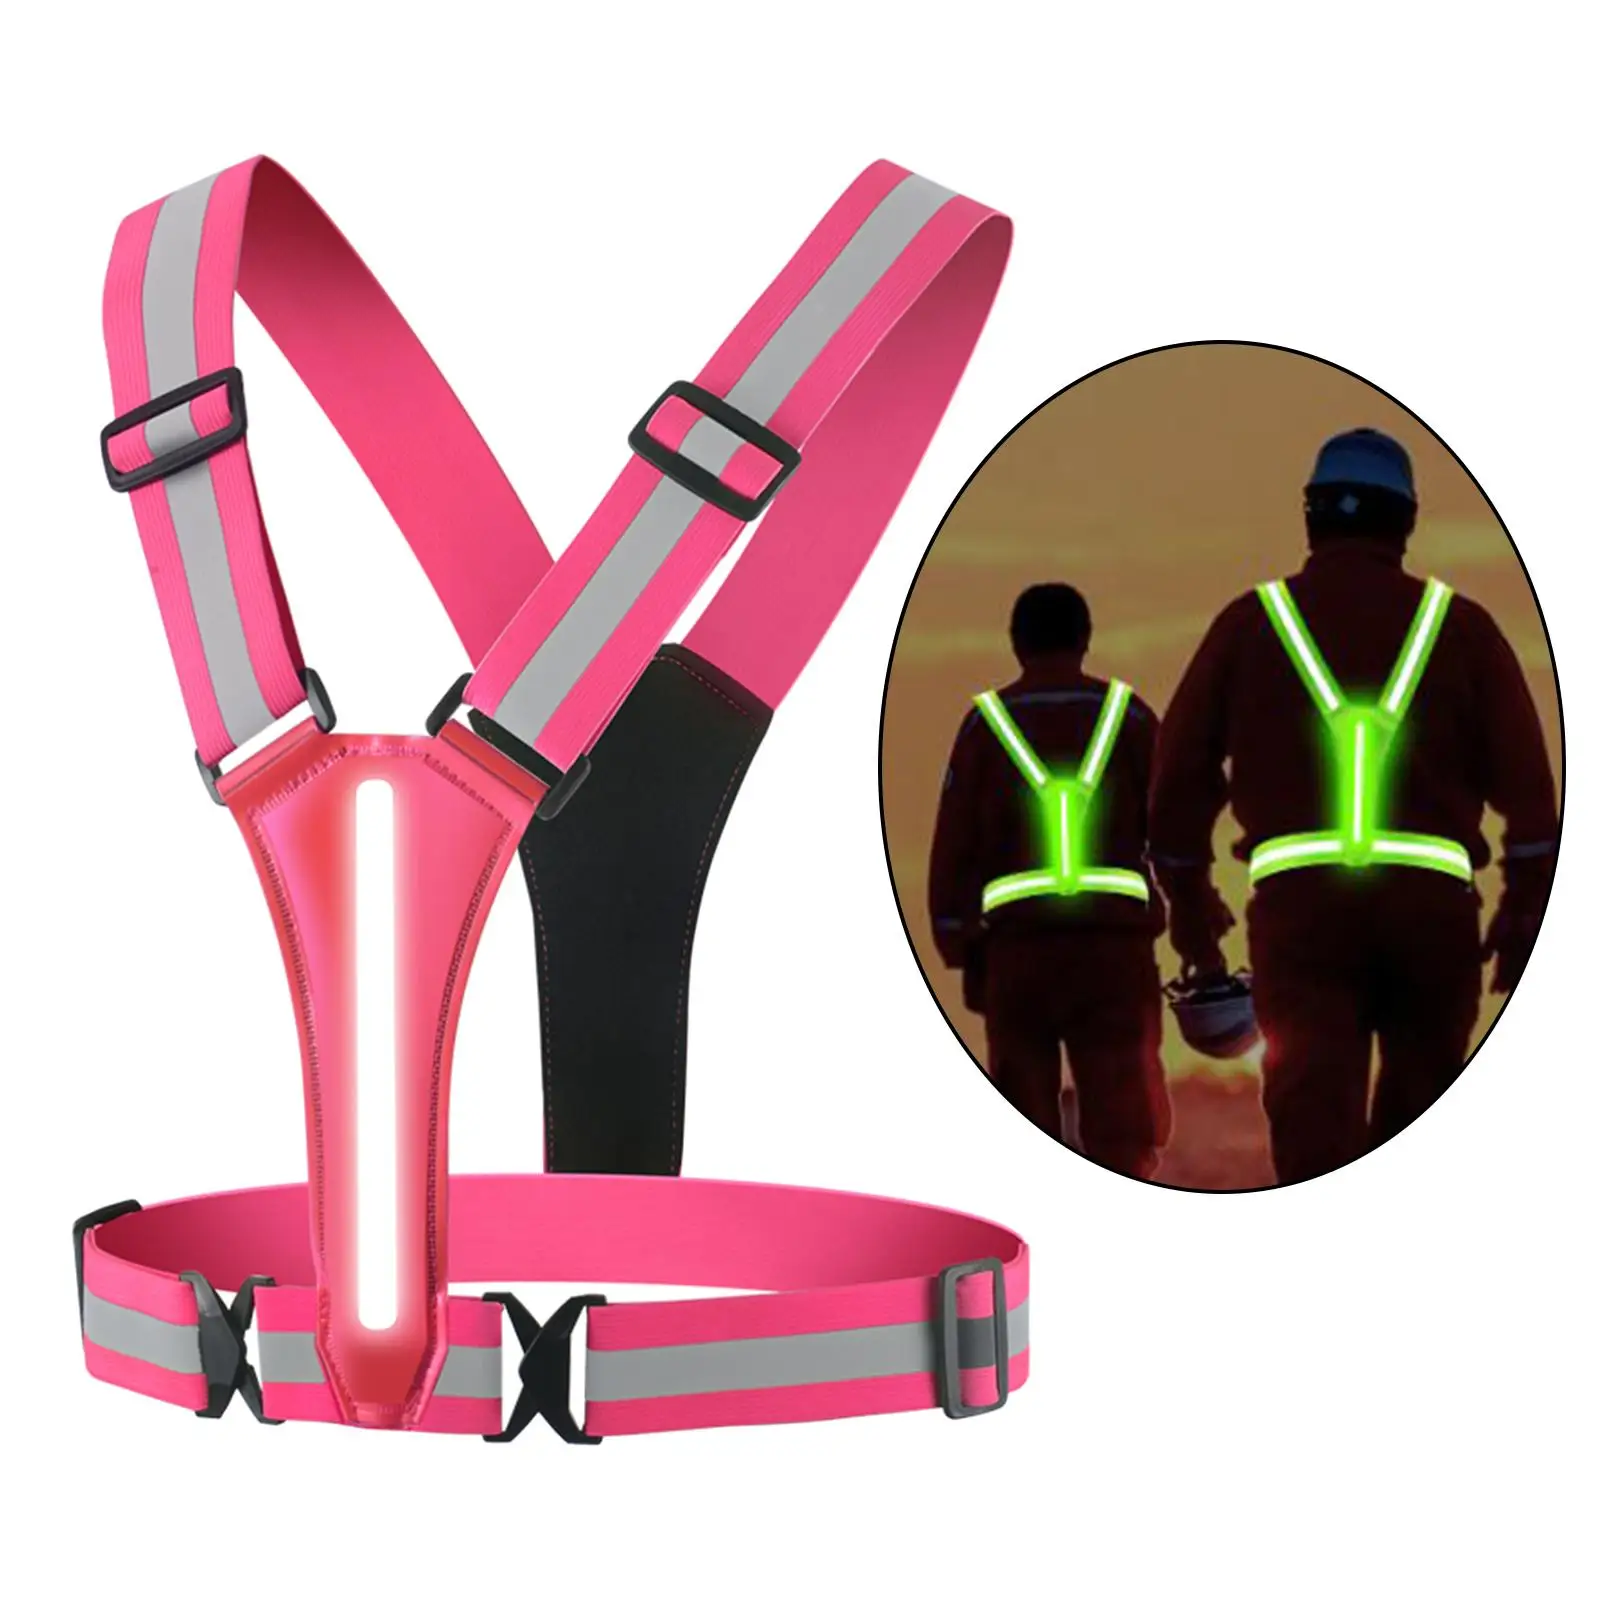 LED Reflective Vest Adjustable USB Rechargeable Glowing Reflector Straps for Night Walking Running Hiking Sports Men Women Kids